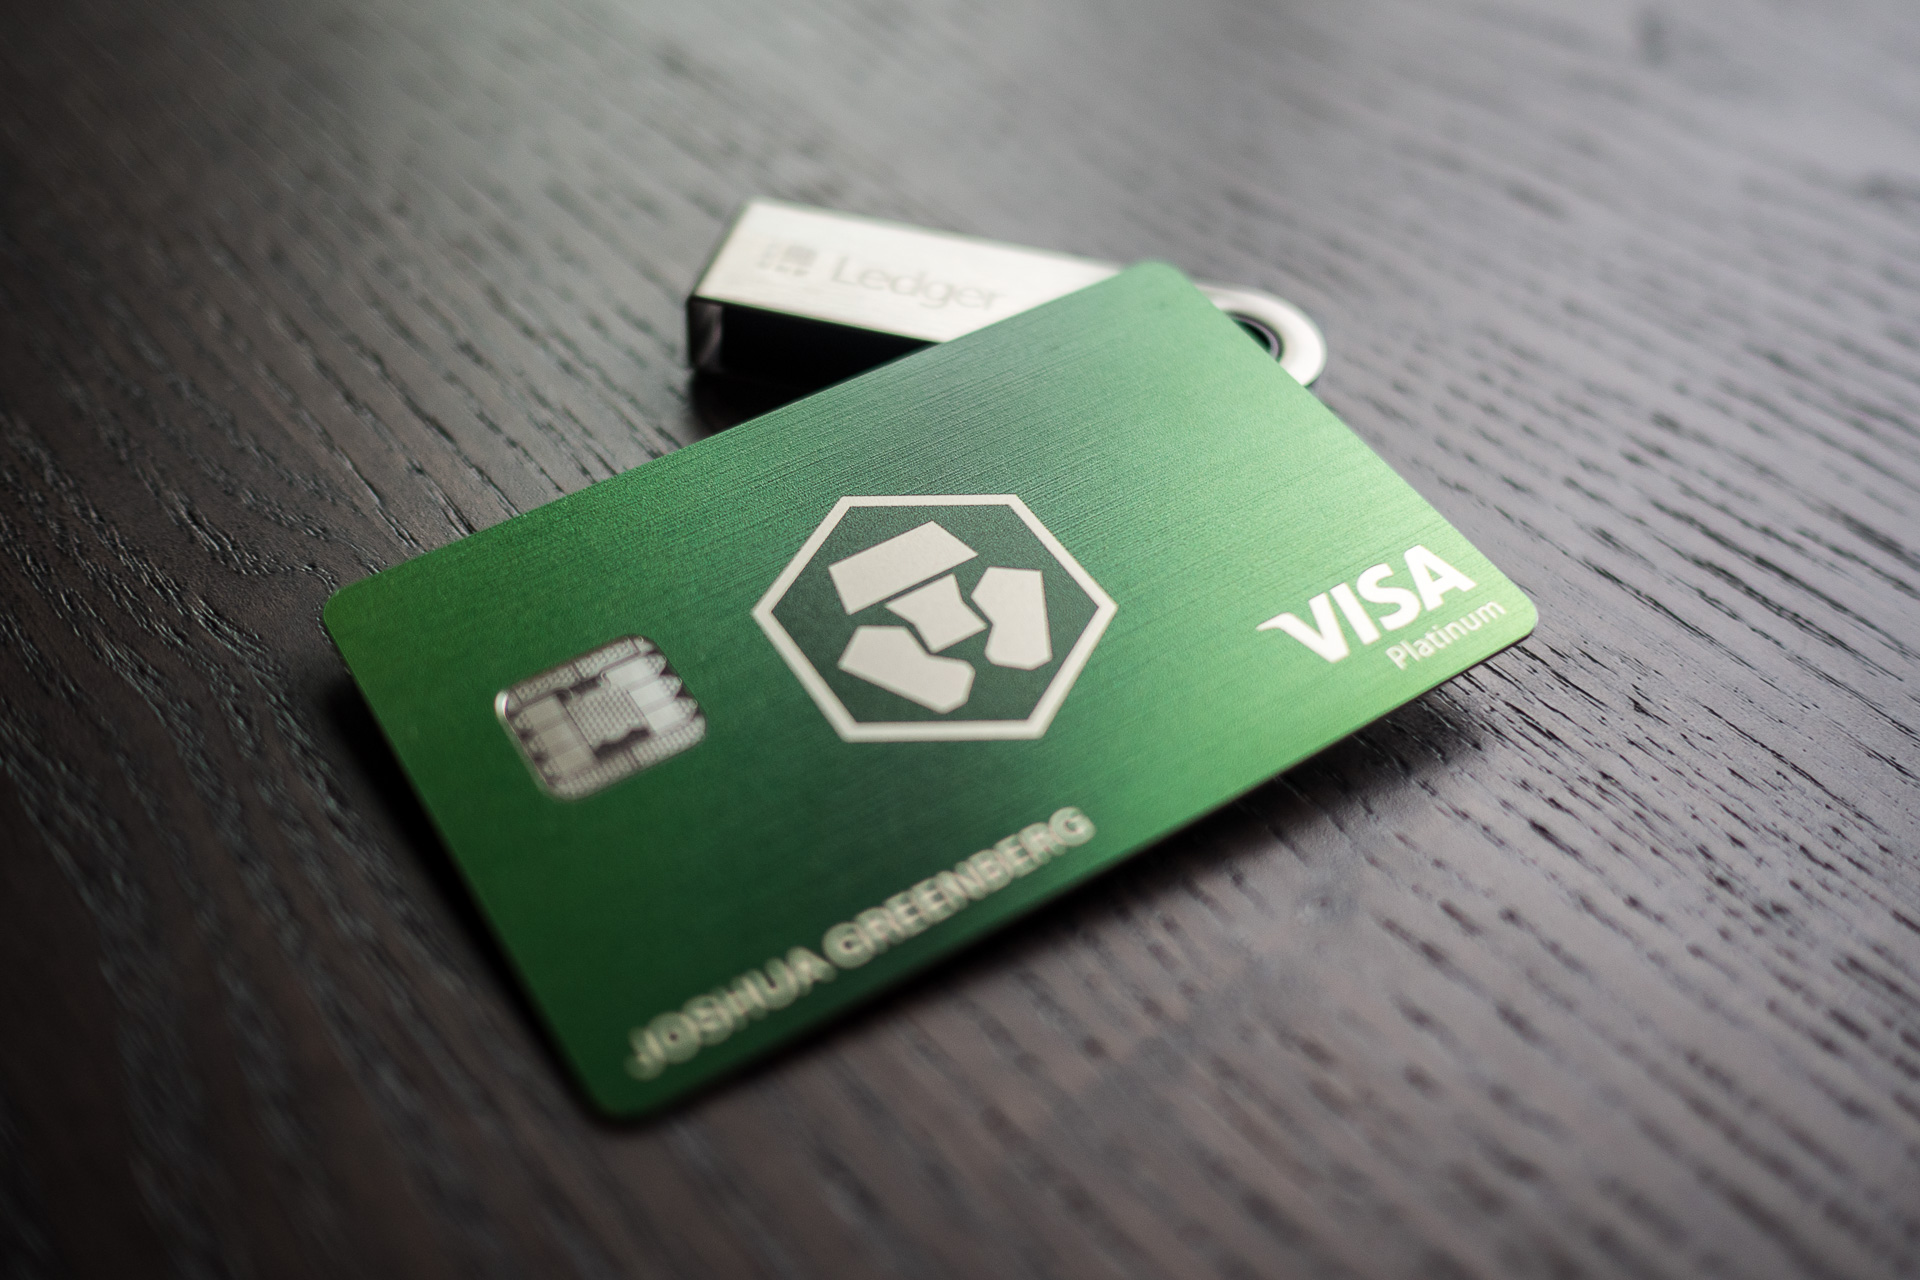 crypto currency deal with visa